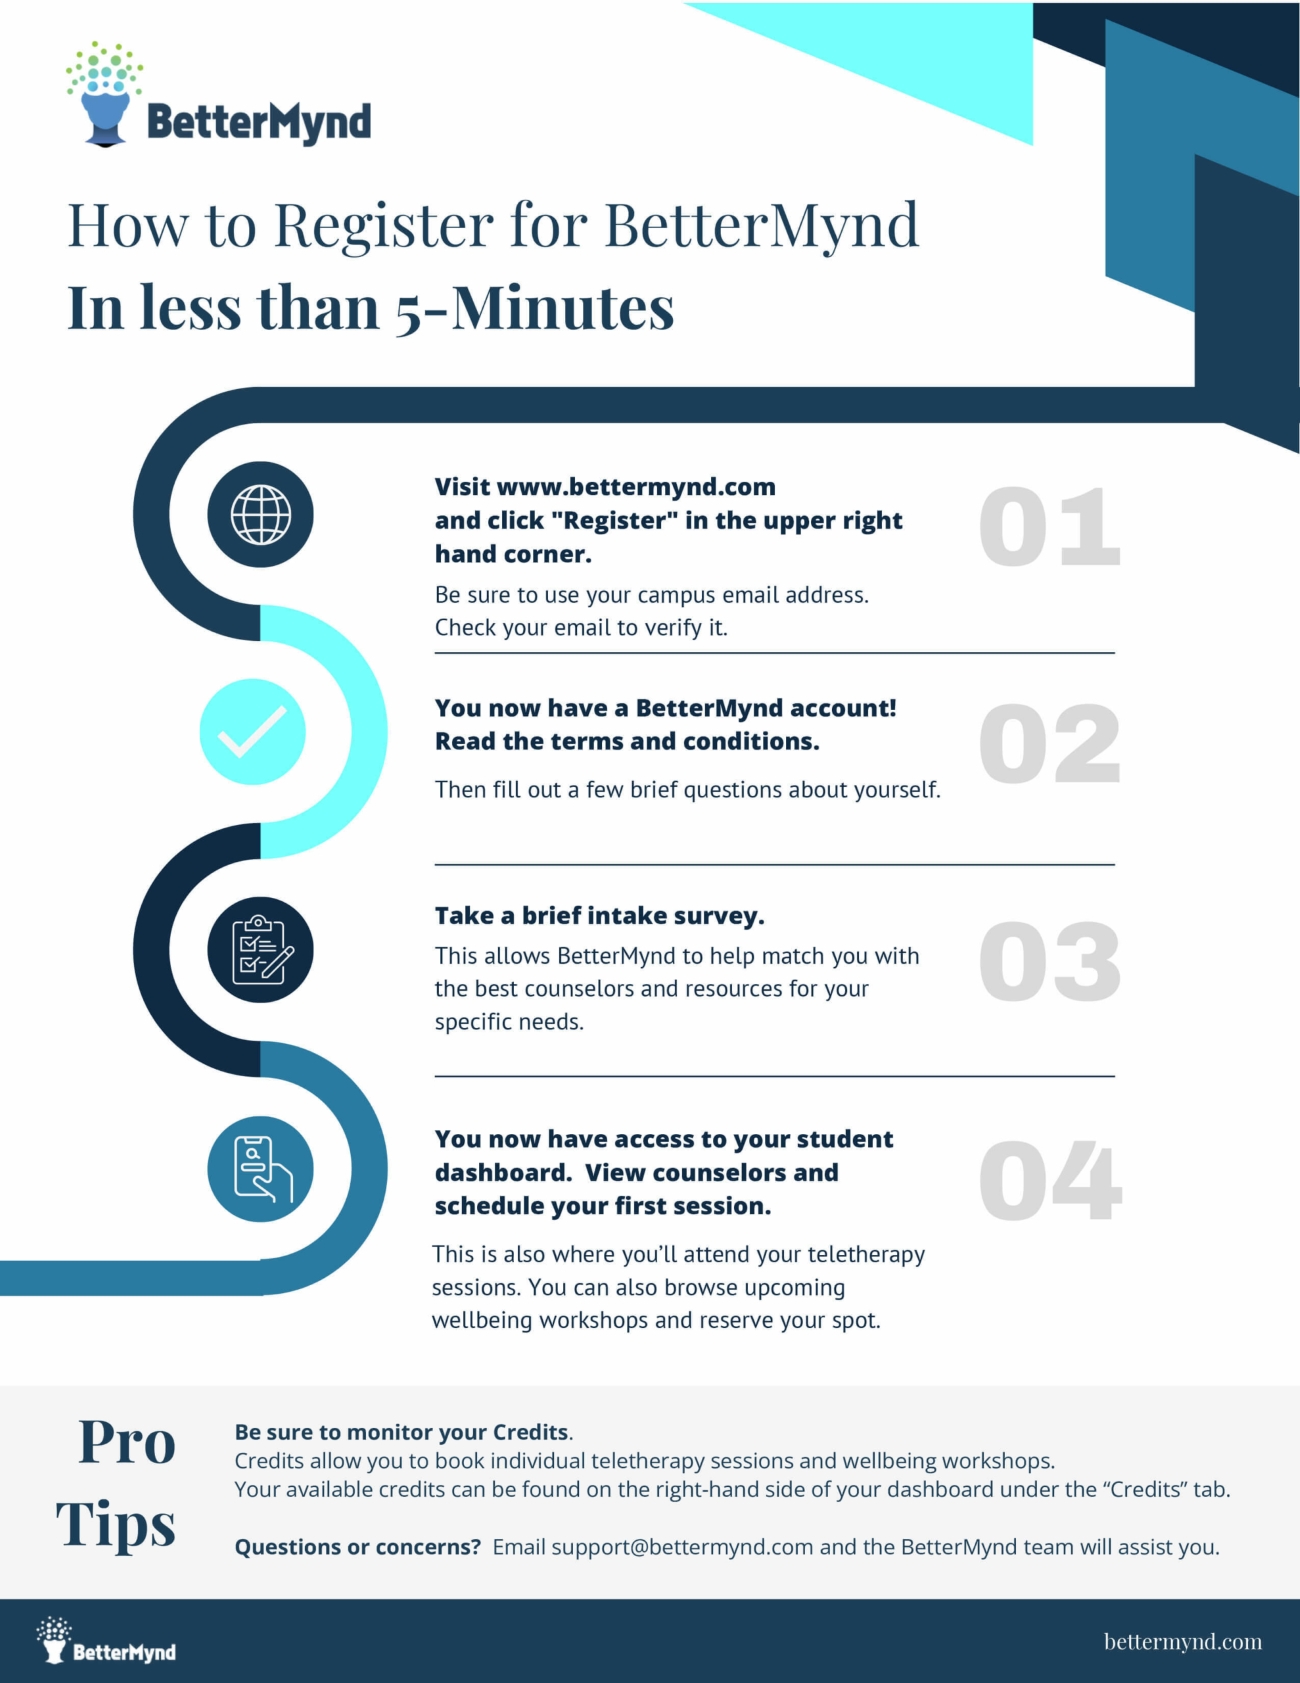 How to Register for BetterMynd in Less than 5 Minutes